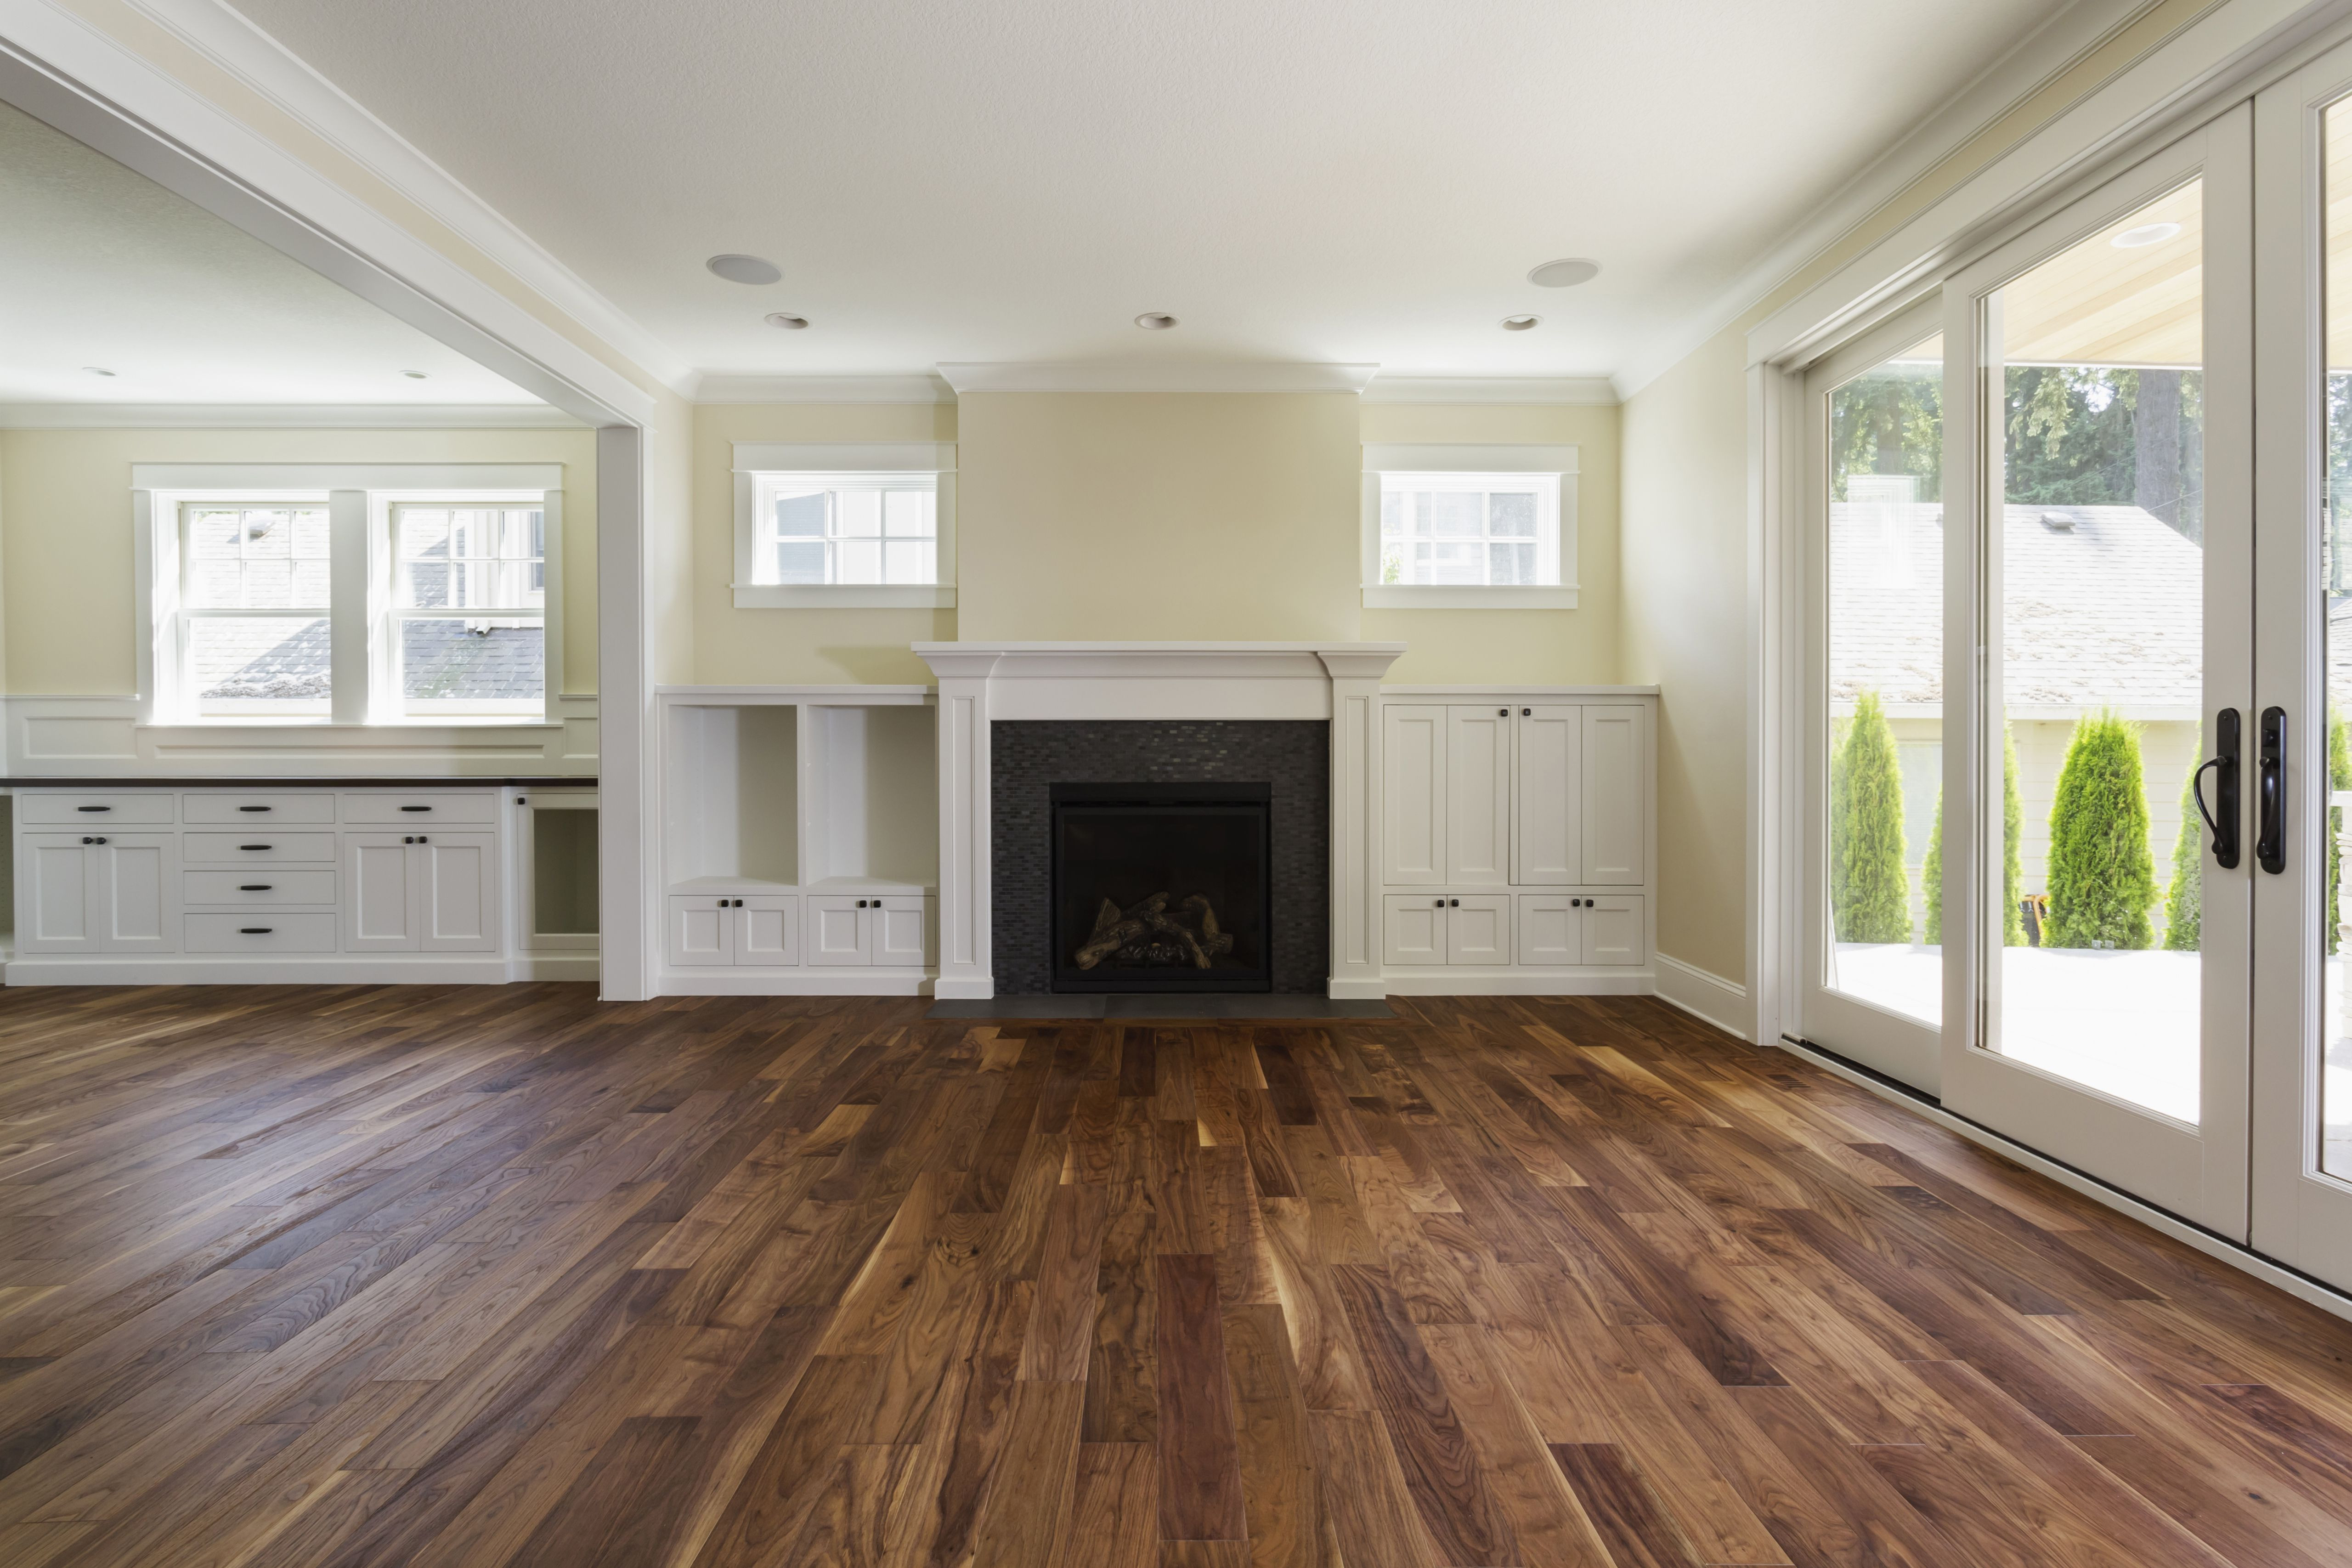 26 Famous Looking for Hardwood Flooring Jobs 2024 free download looking for hardwood flooring jobs of the pros and cons of prefinished hardwood flooring in fireplace and built in shelves in living room 482143011 57bef8e33df78cc16e035397